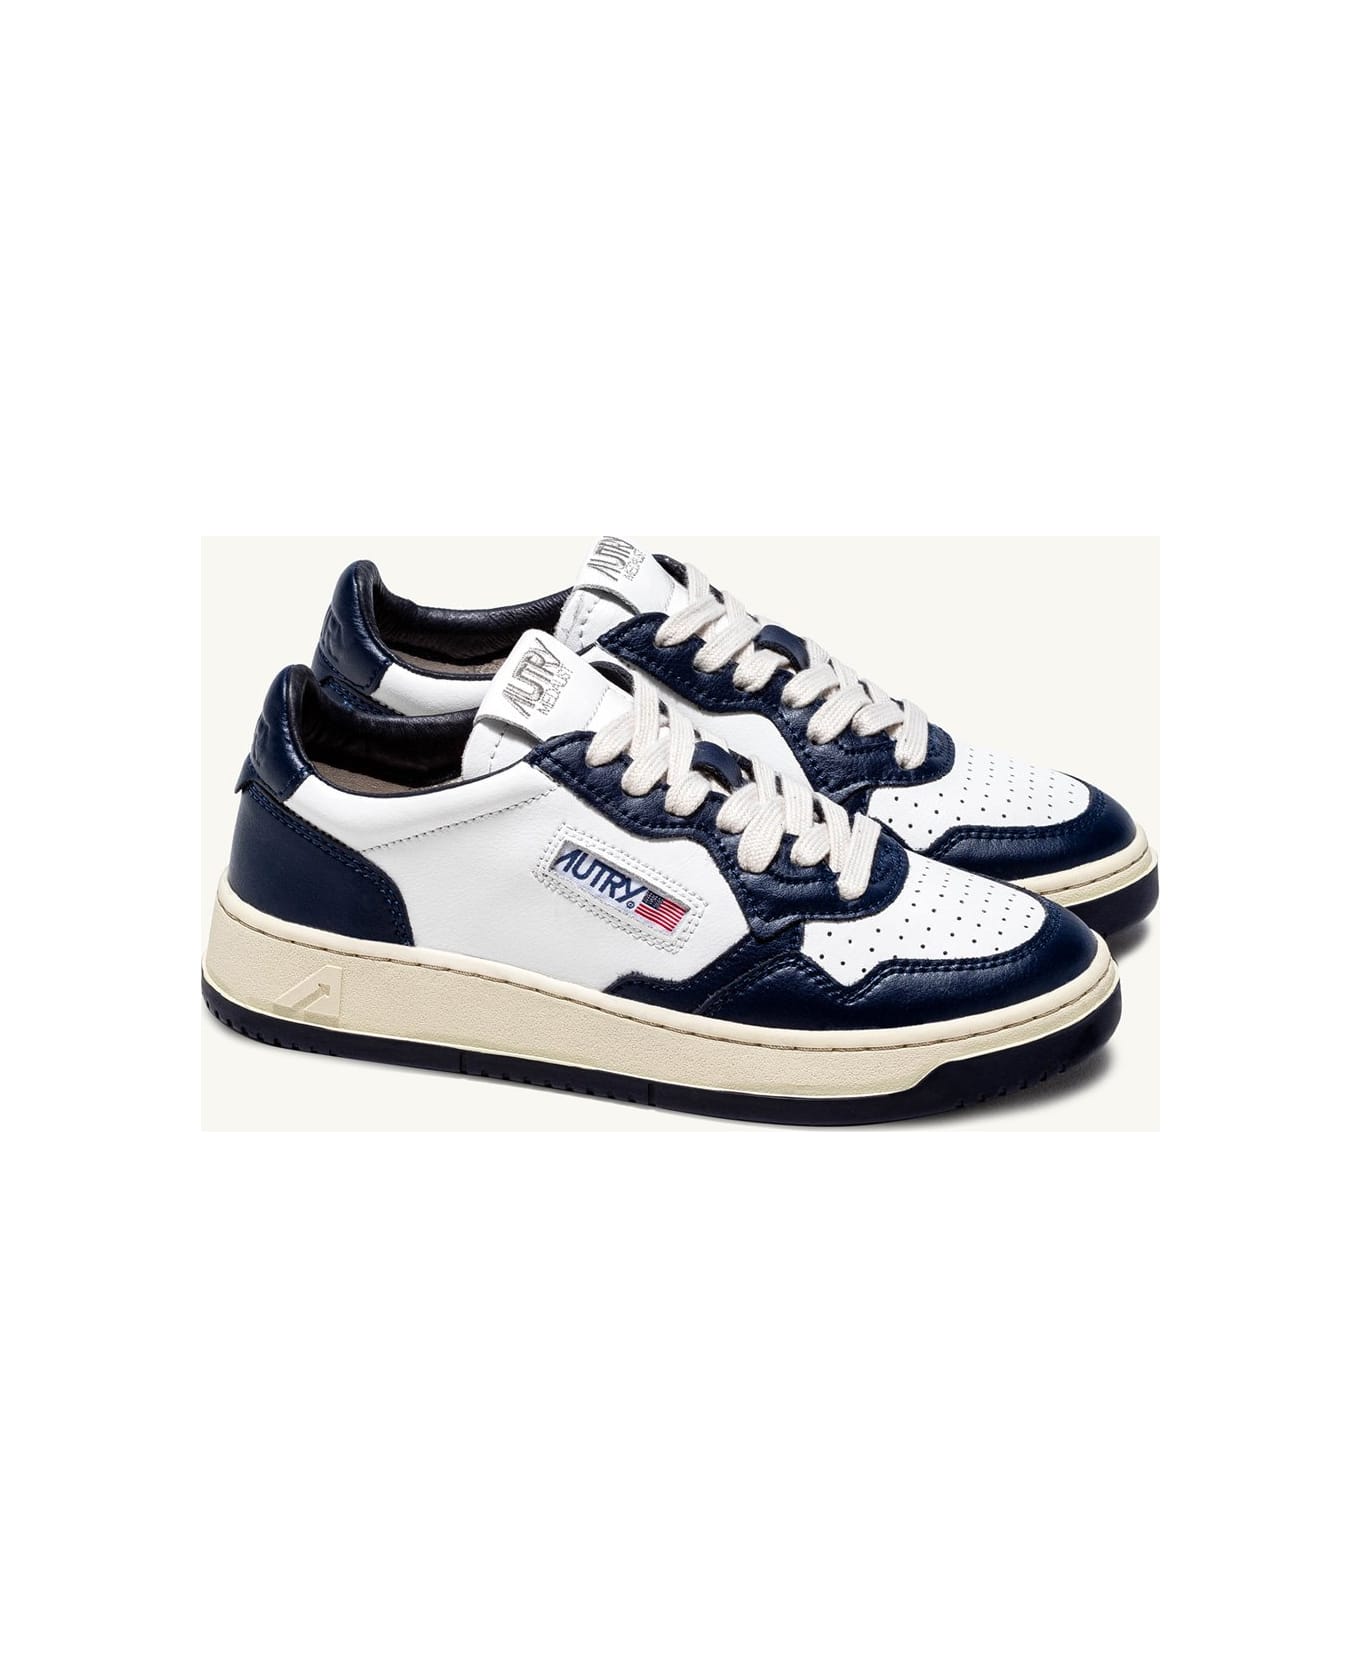 Autry Medalist Low Leather Sneakers - Wht/blue スニーカー